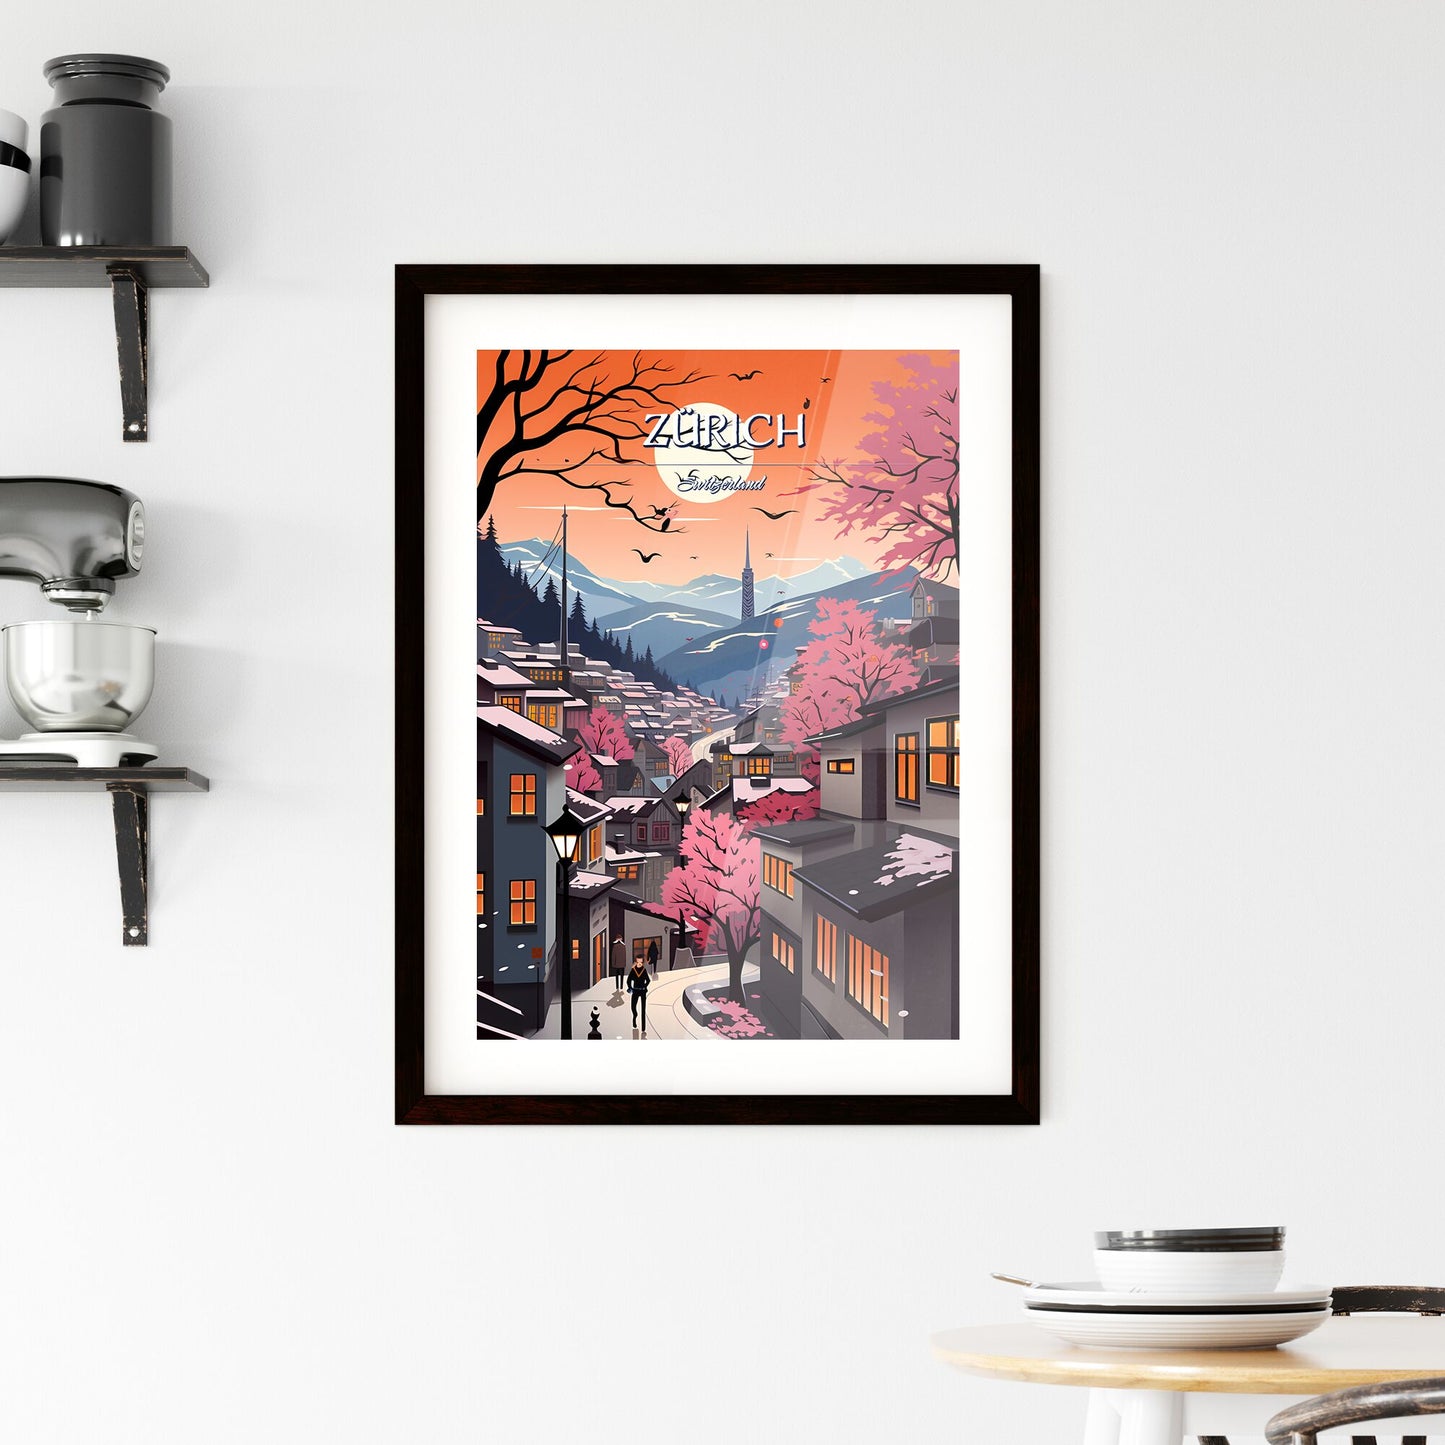 Zürich, Switzerland, - Art print of a city with trees and mountains Default Title